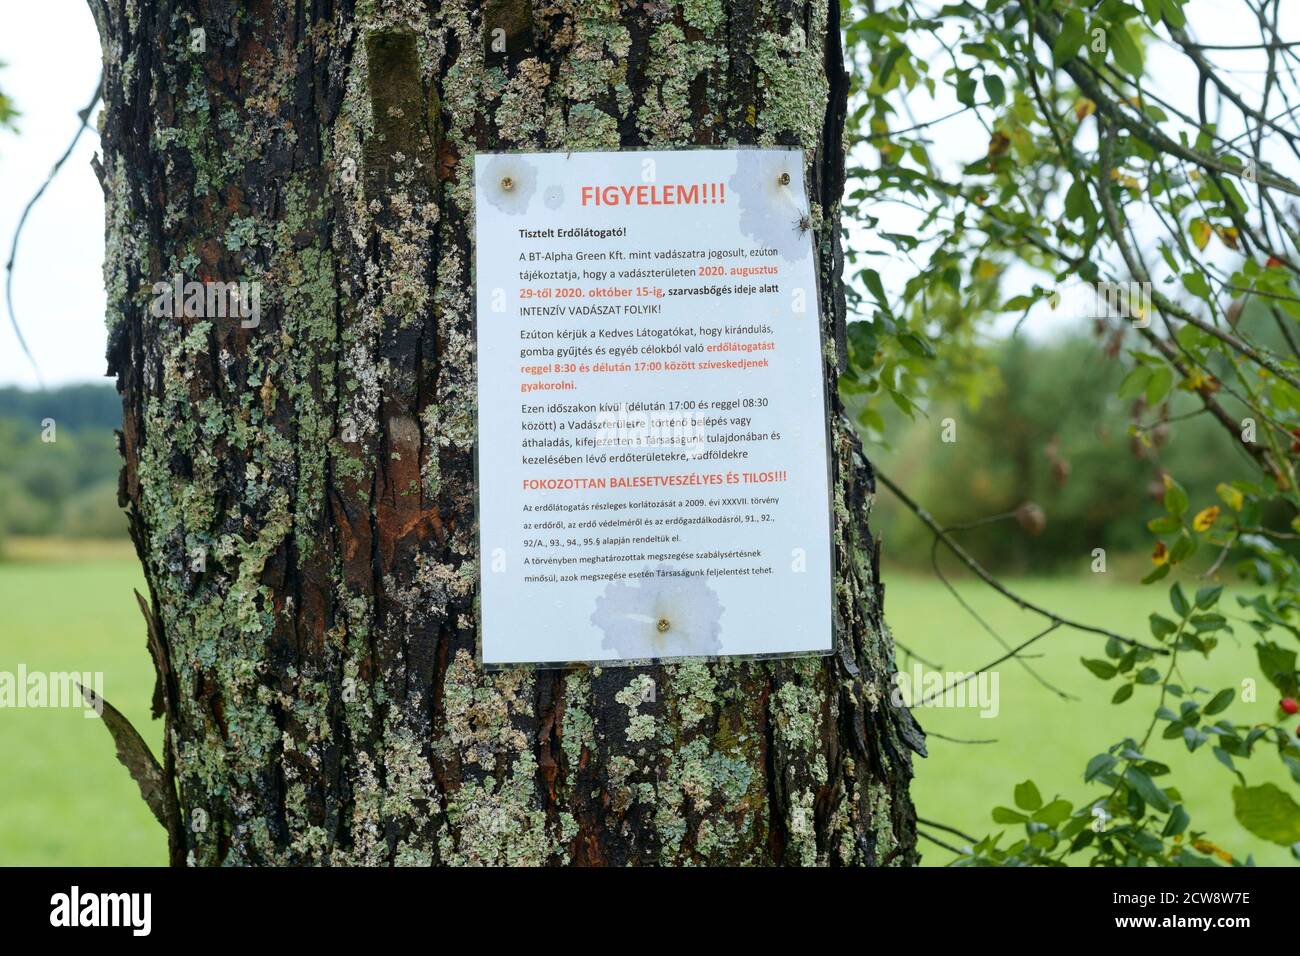 warning notice pinned to tree alerting people to the dangers of walking in the area during certain hours due to shooting and hunting season hungary Stock Photo